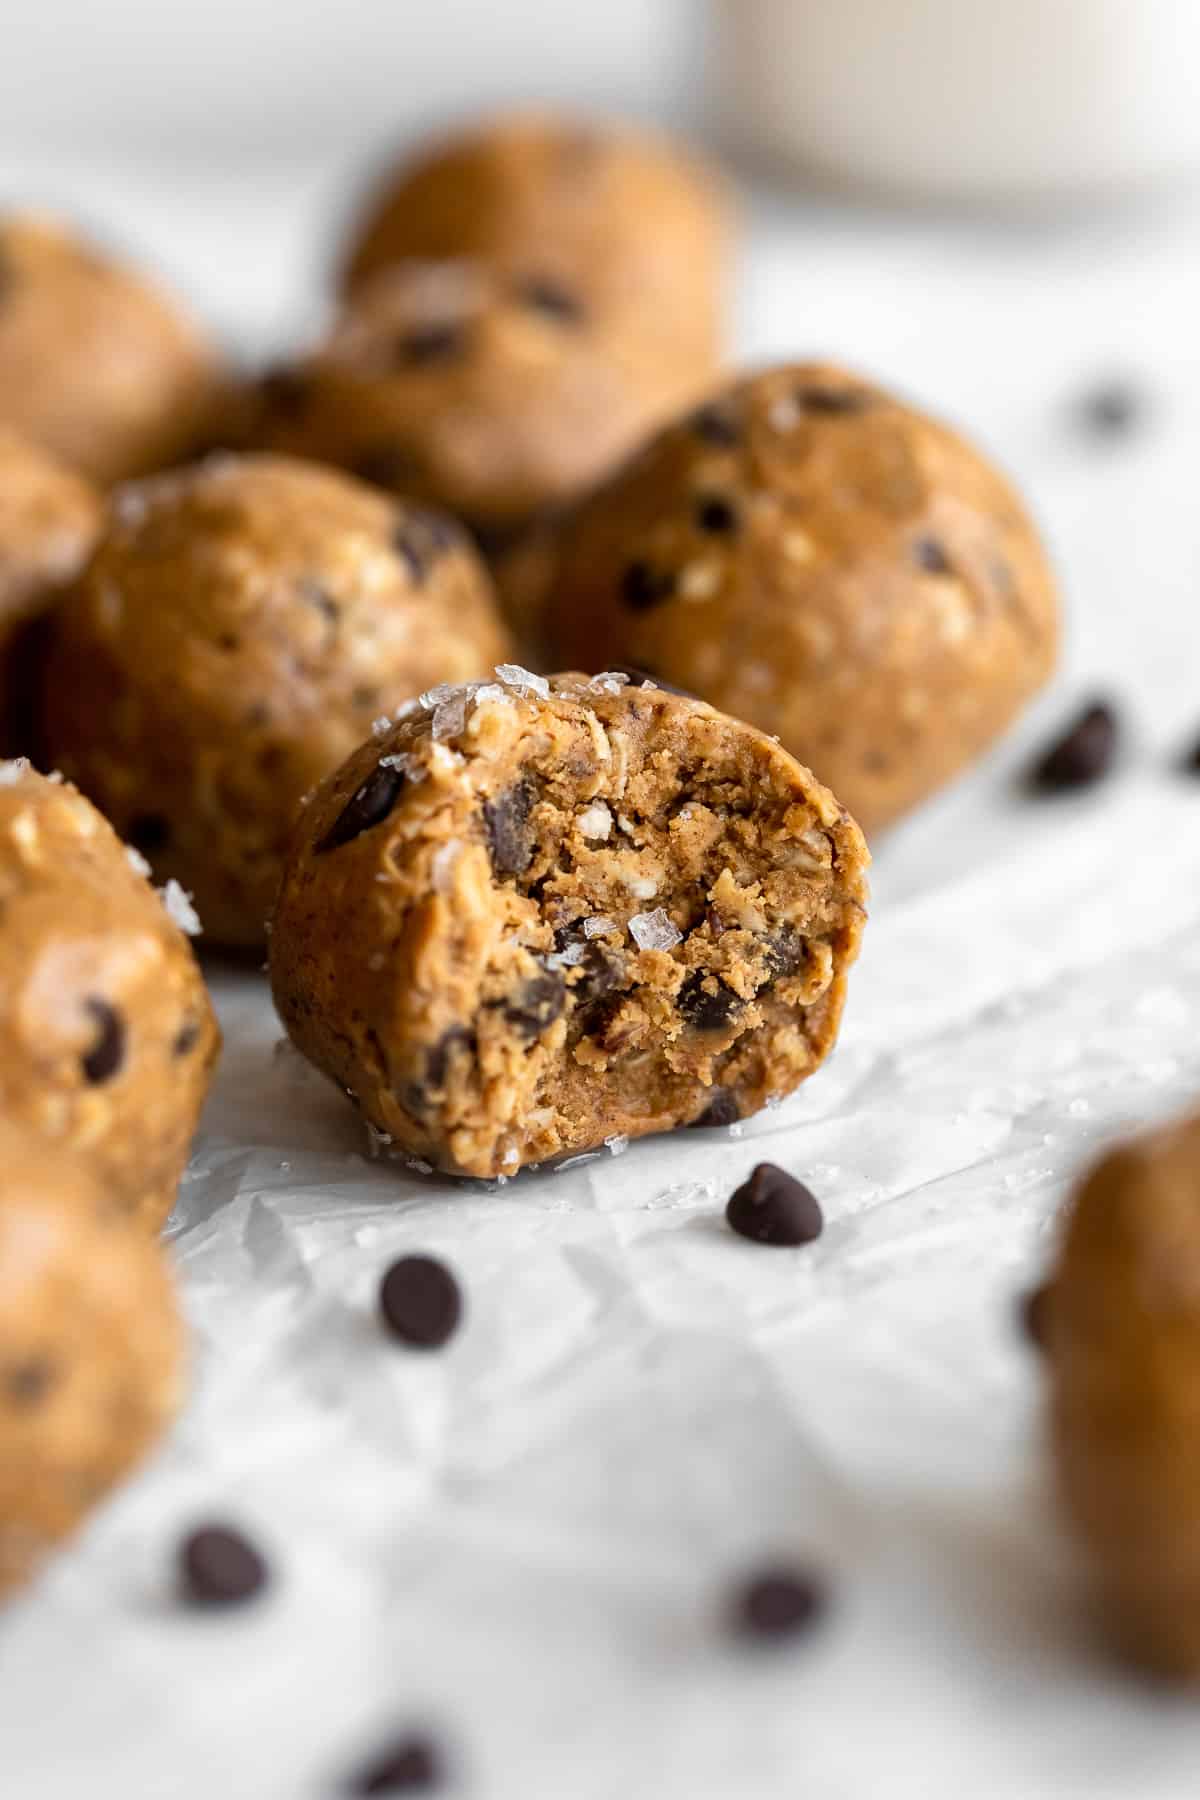 peanut butter protein balls with chocolate chips and a bite taken out